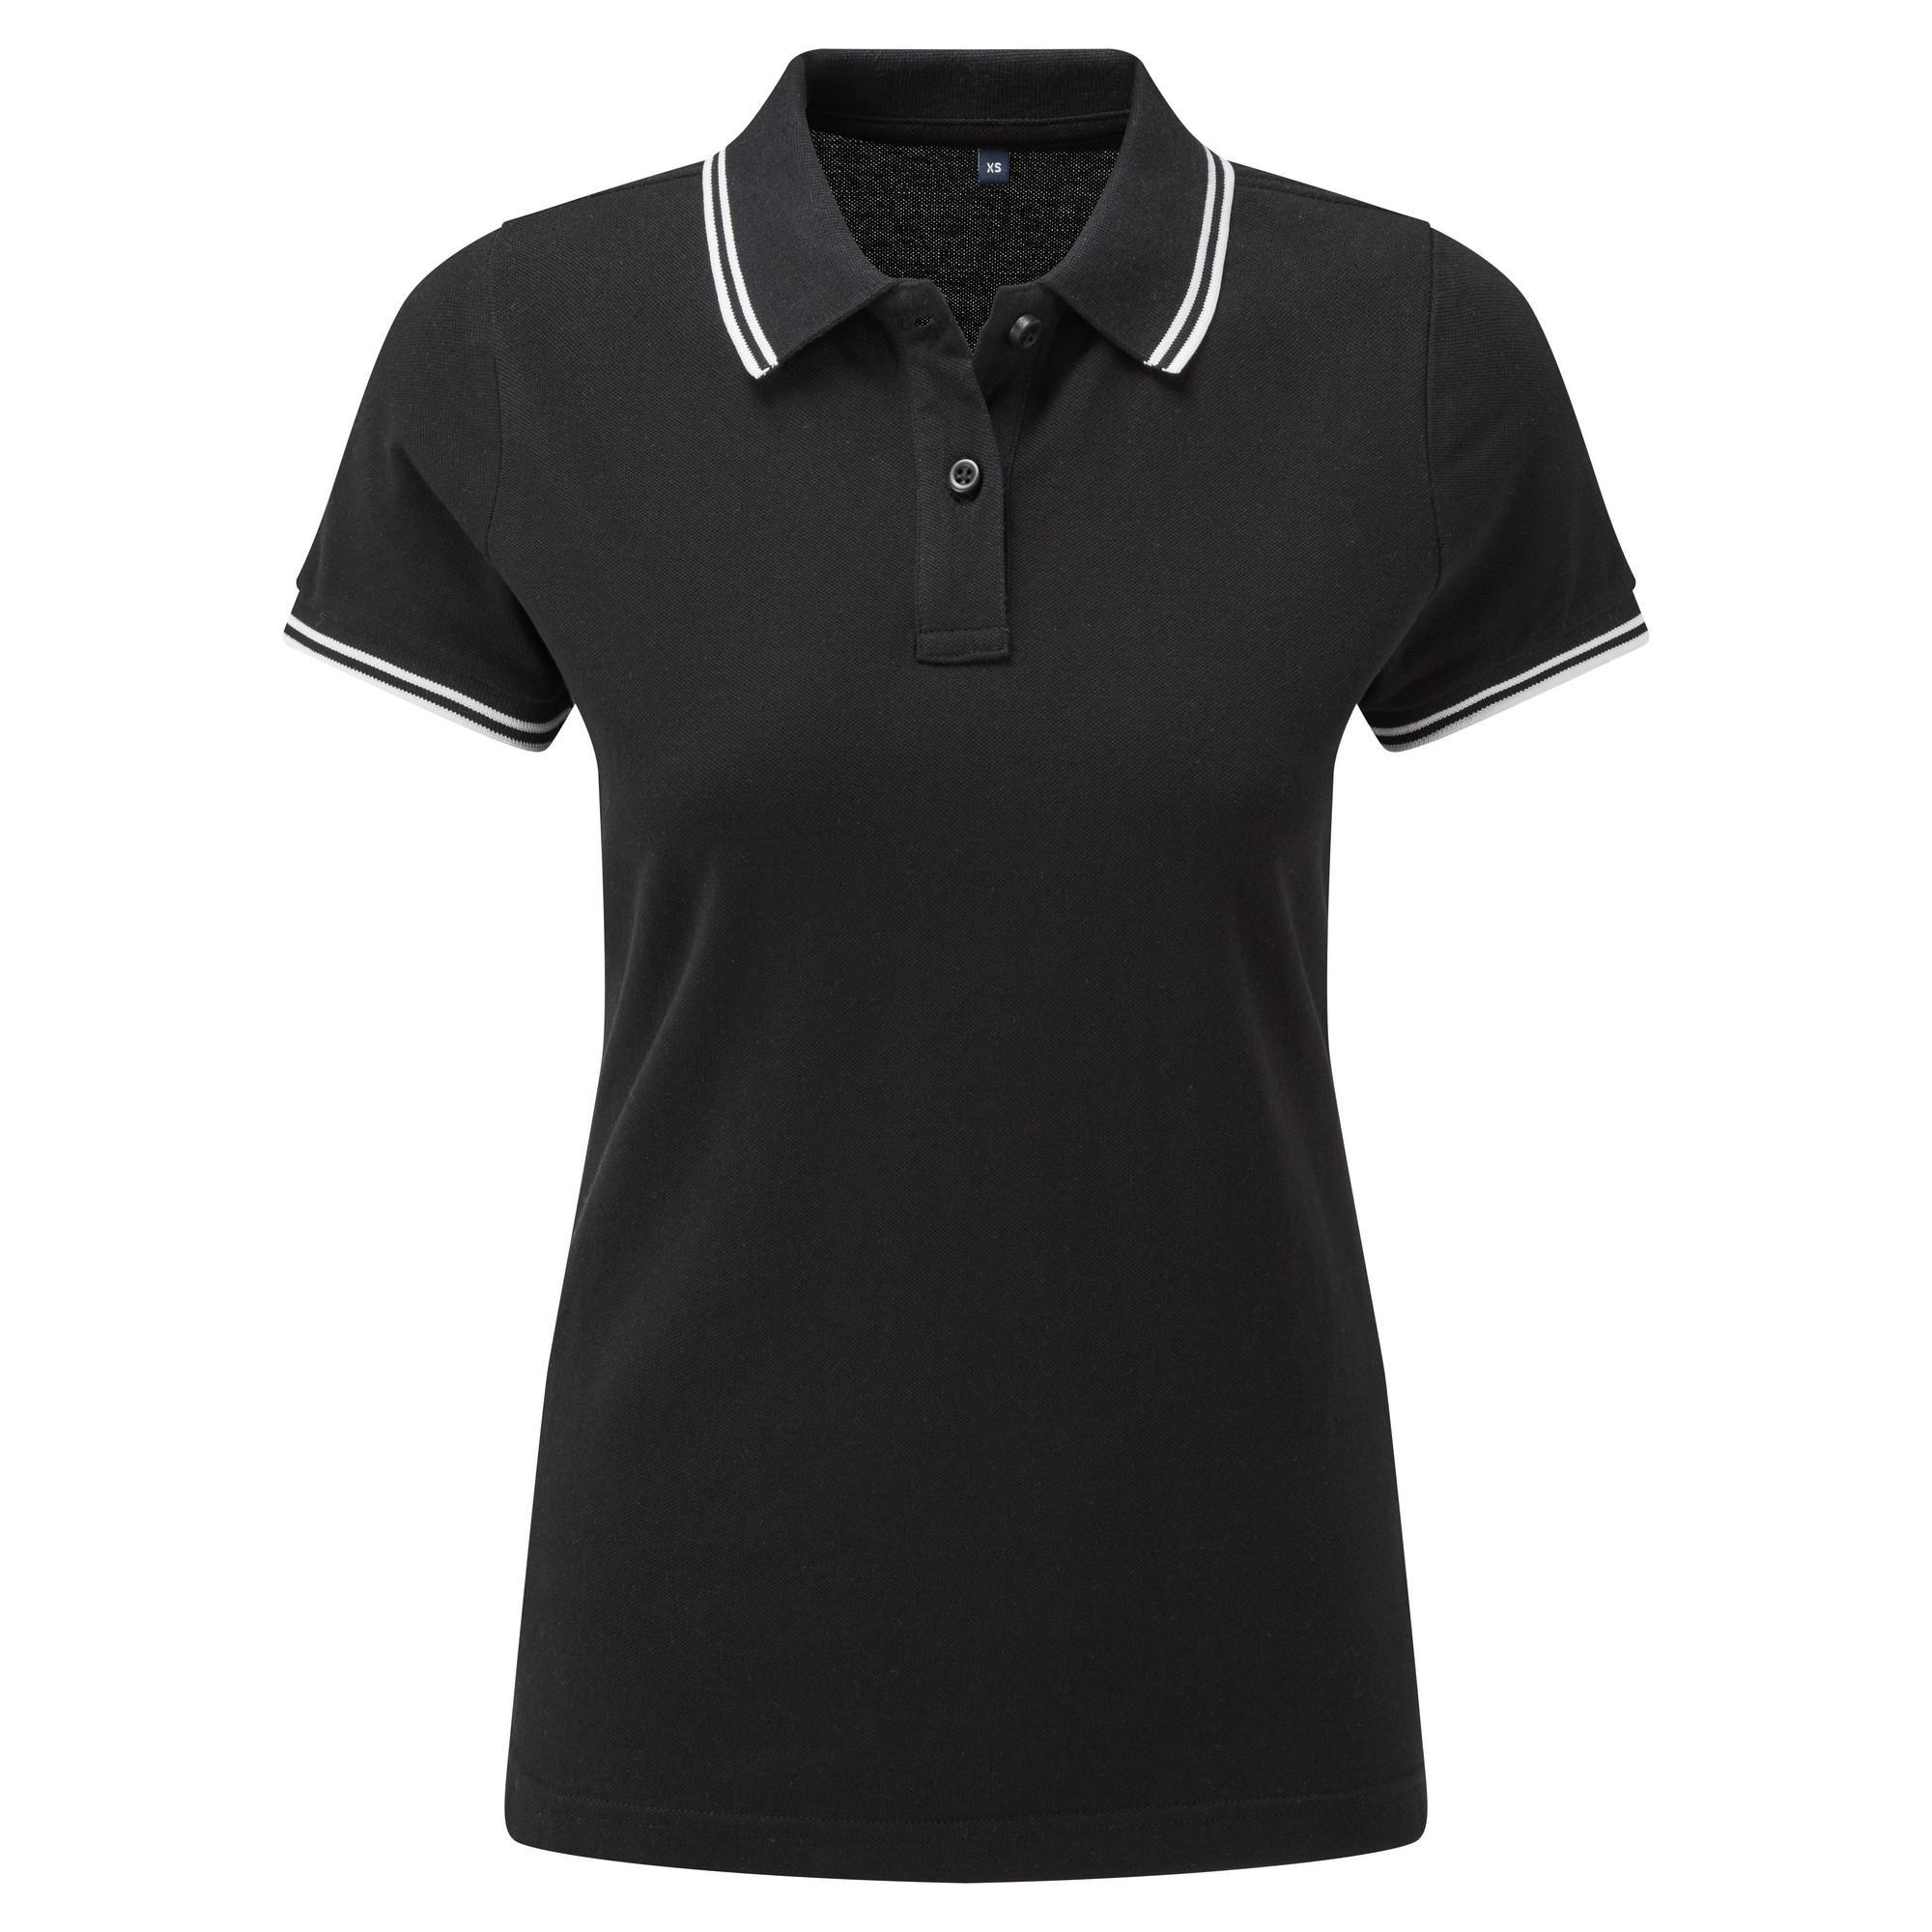 Asquith & Fox Womens/Ladies Classic Fit Tipped Polo (Black/White) (M)